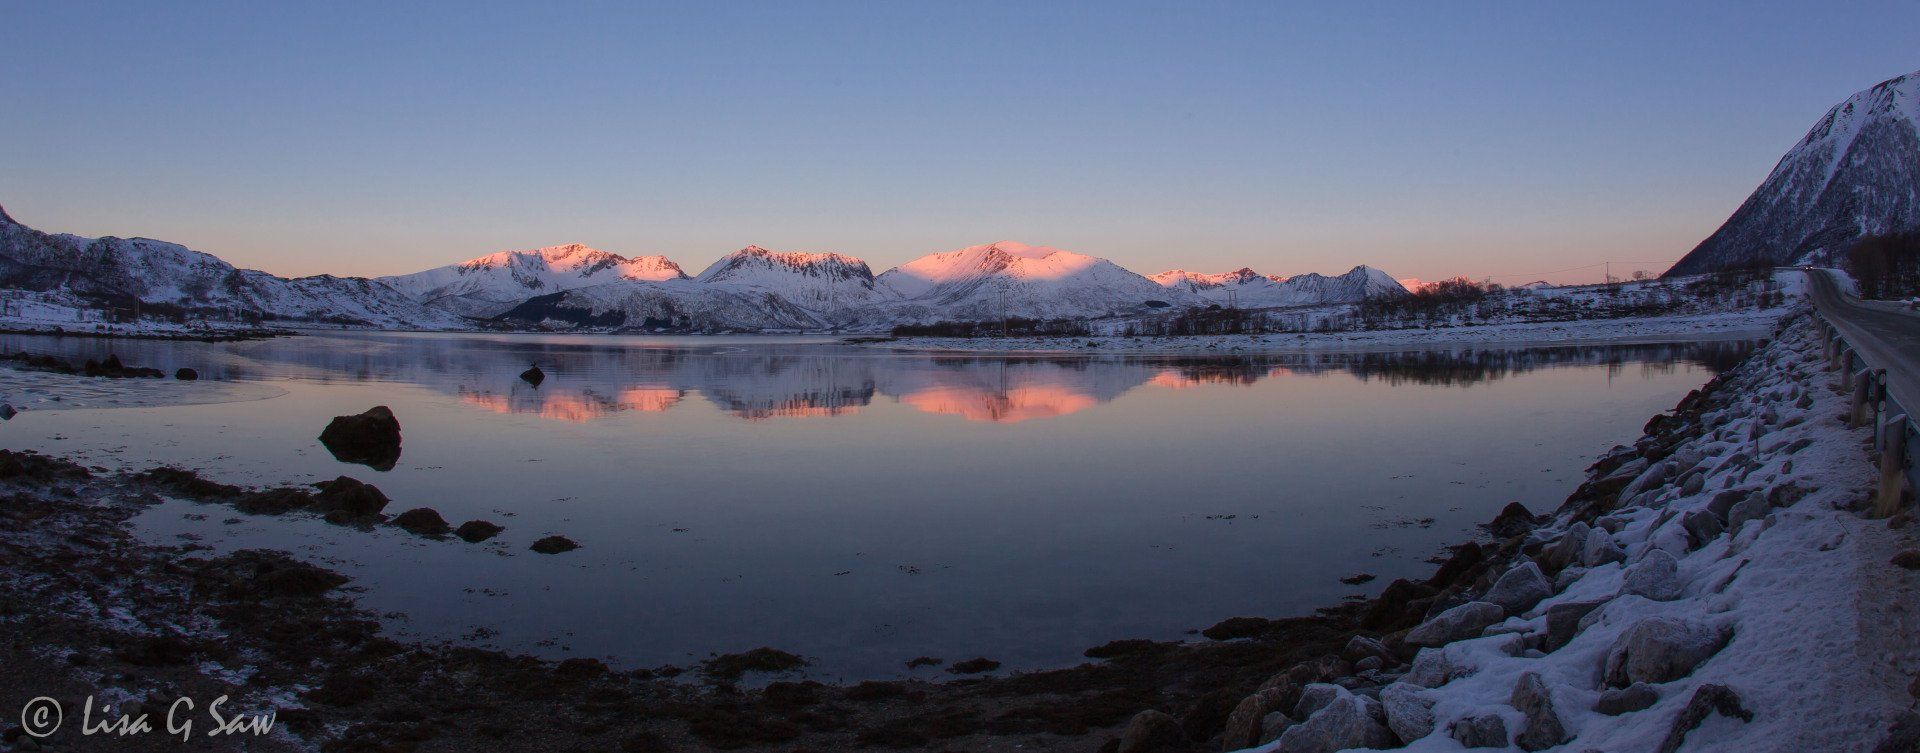 Snow covered mountains reflected in water at sunrise